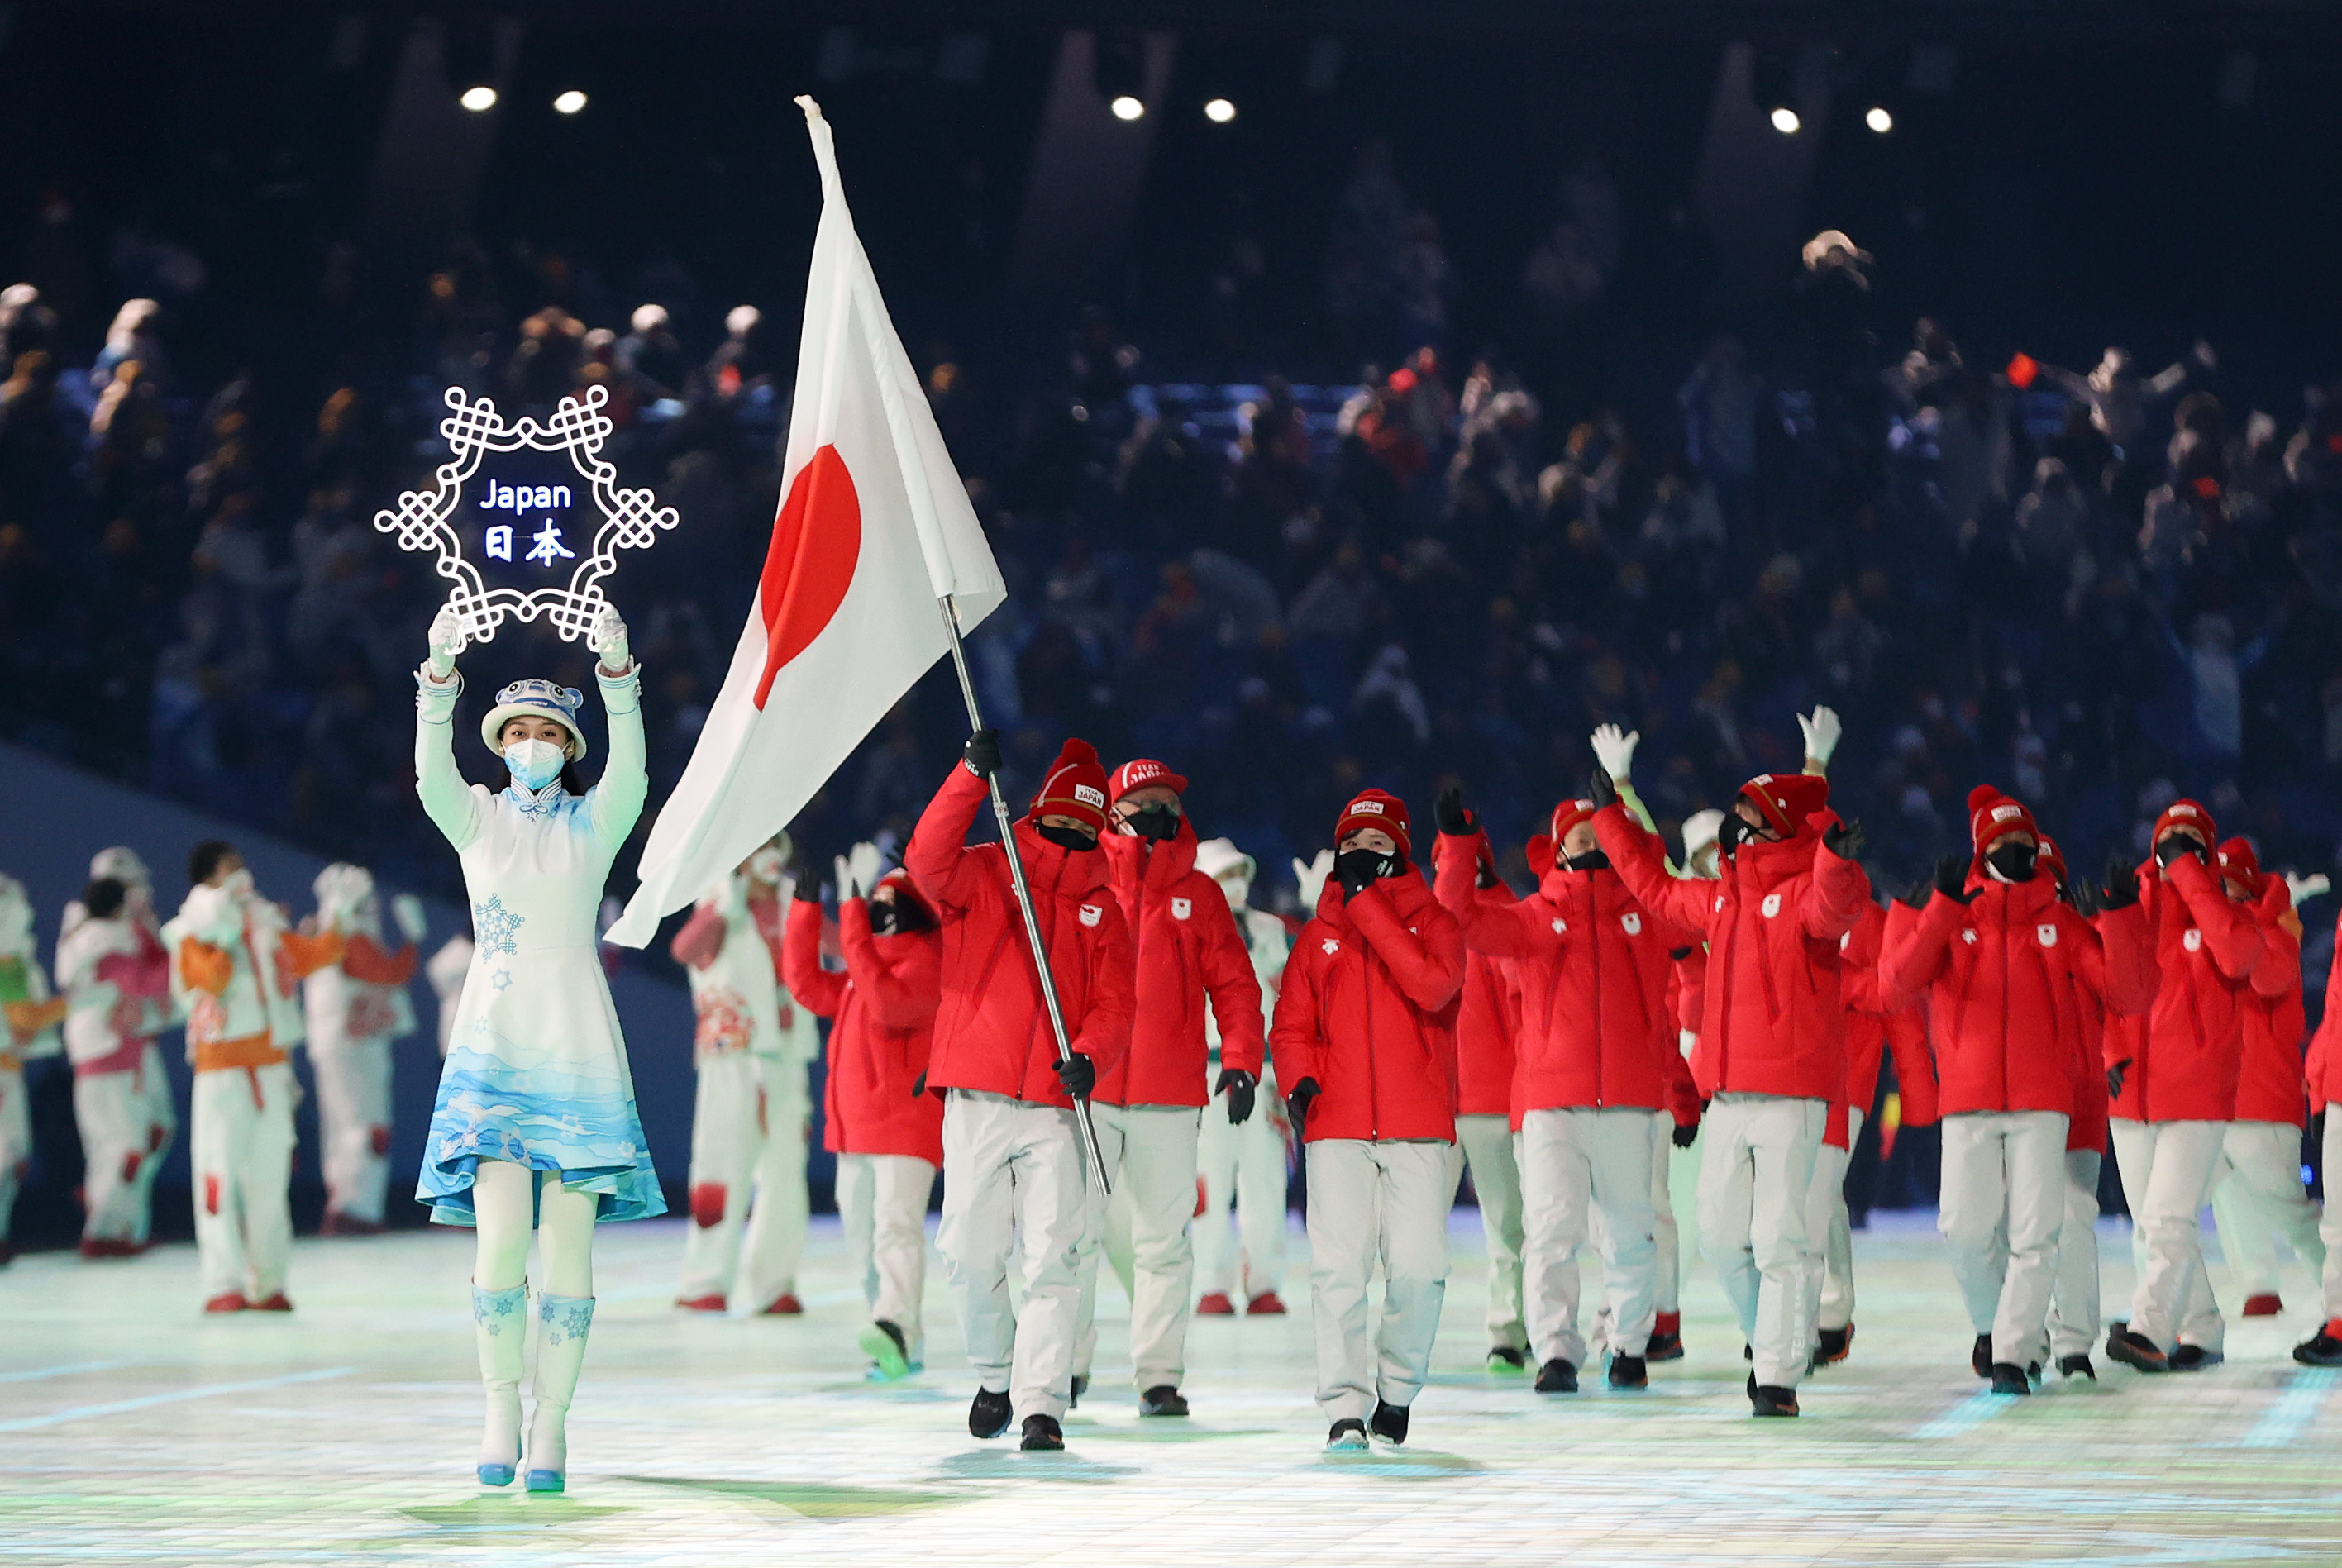 Flag bearers Arisa Go and Akito Watabe of Team Japan carry their flag during the Opening Ceremony of the Beijing 2022 Winter Olympics at the Beijing National Stadium on February 4 in Beijing, China.